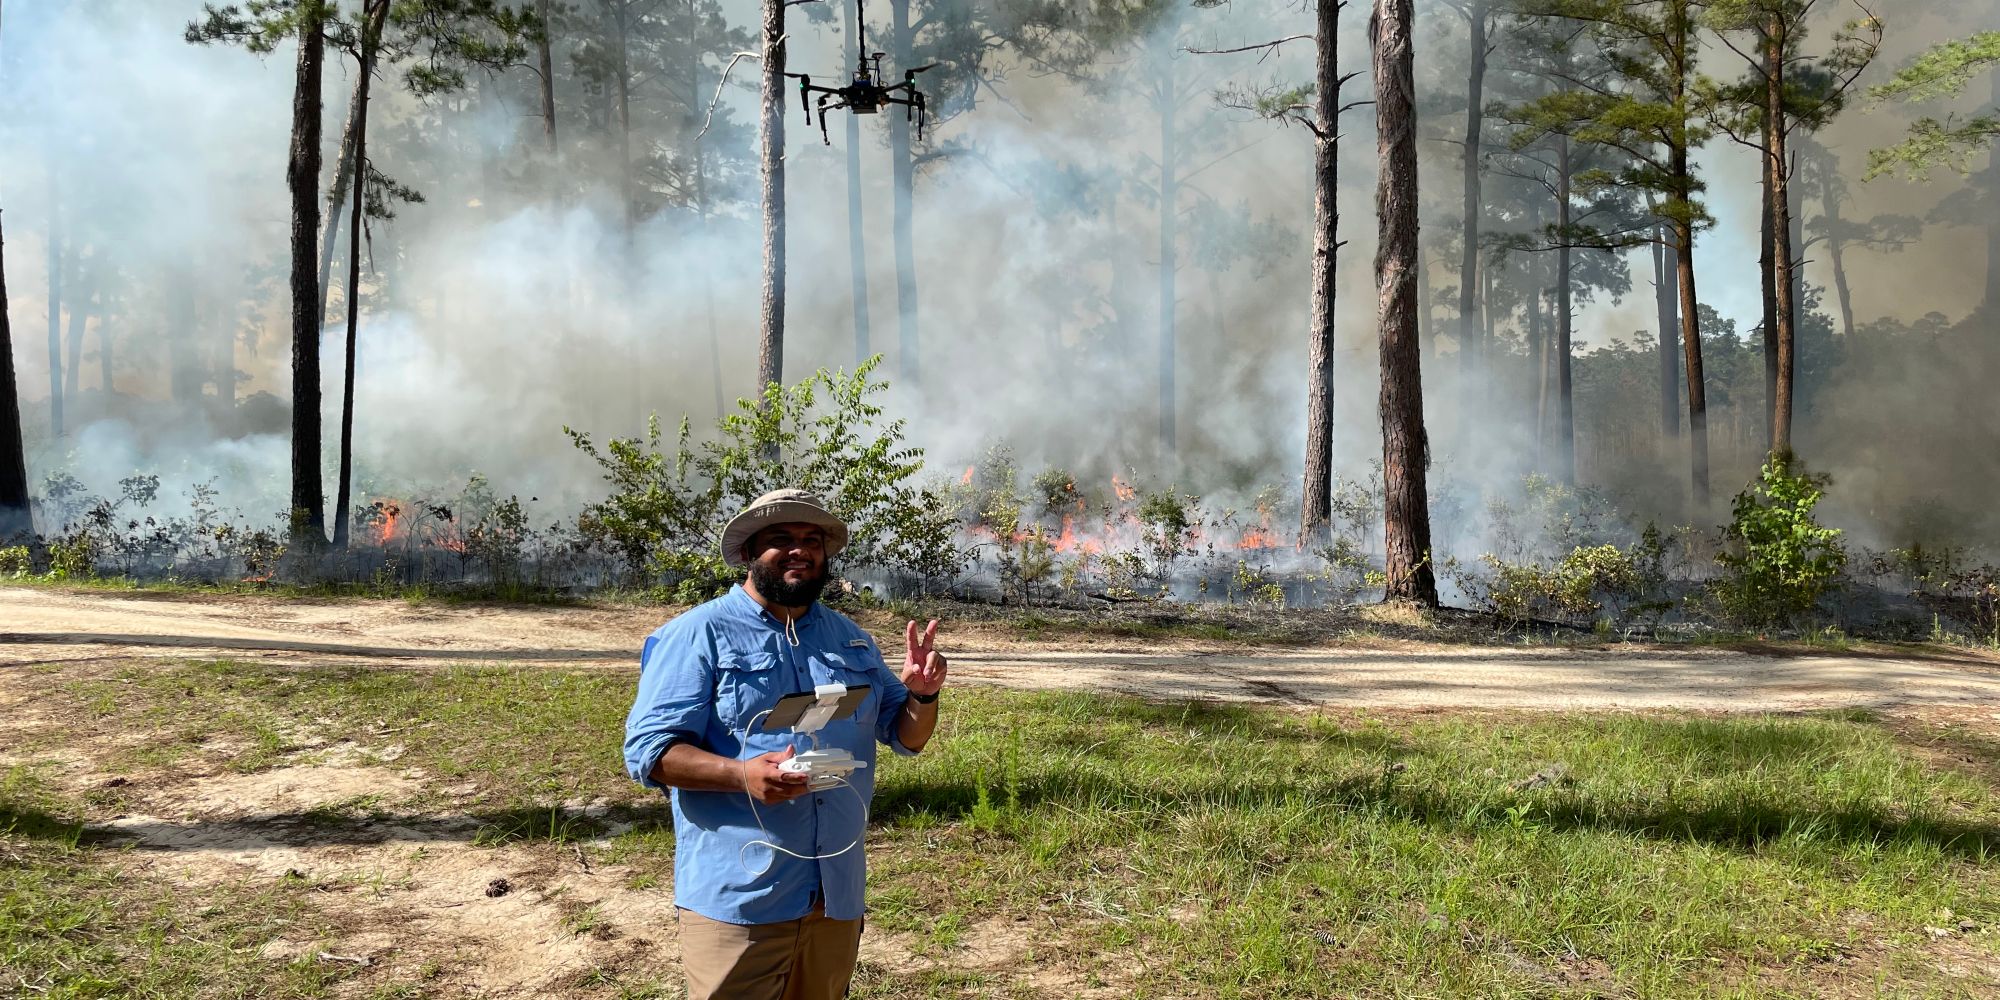 UAS major Jose Cabrera ('22, '24) stands before a prescribed fire during his time researching atmospheric data using drone technology. (Photo: Jose Cabrera)